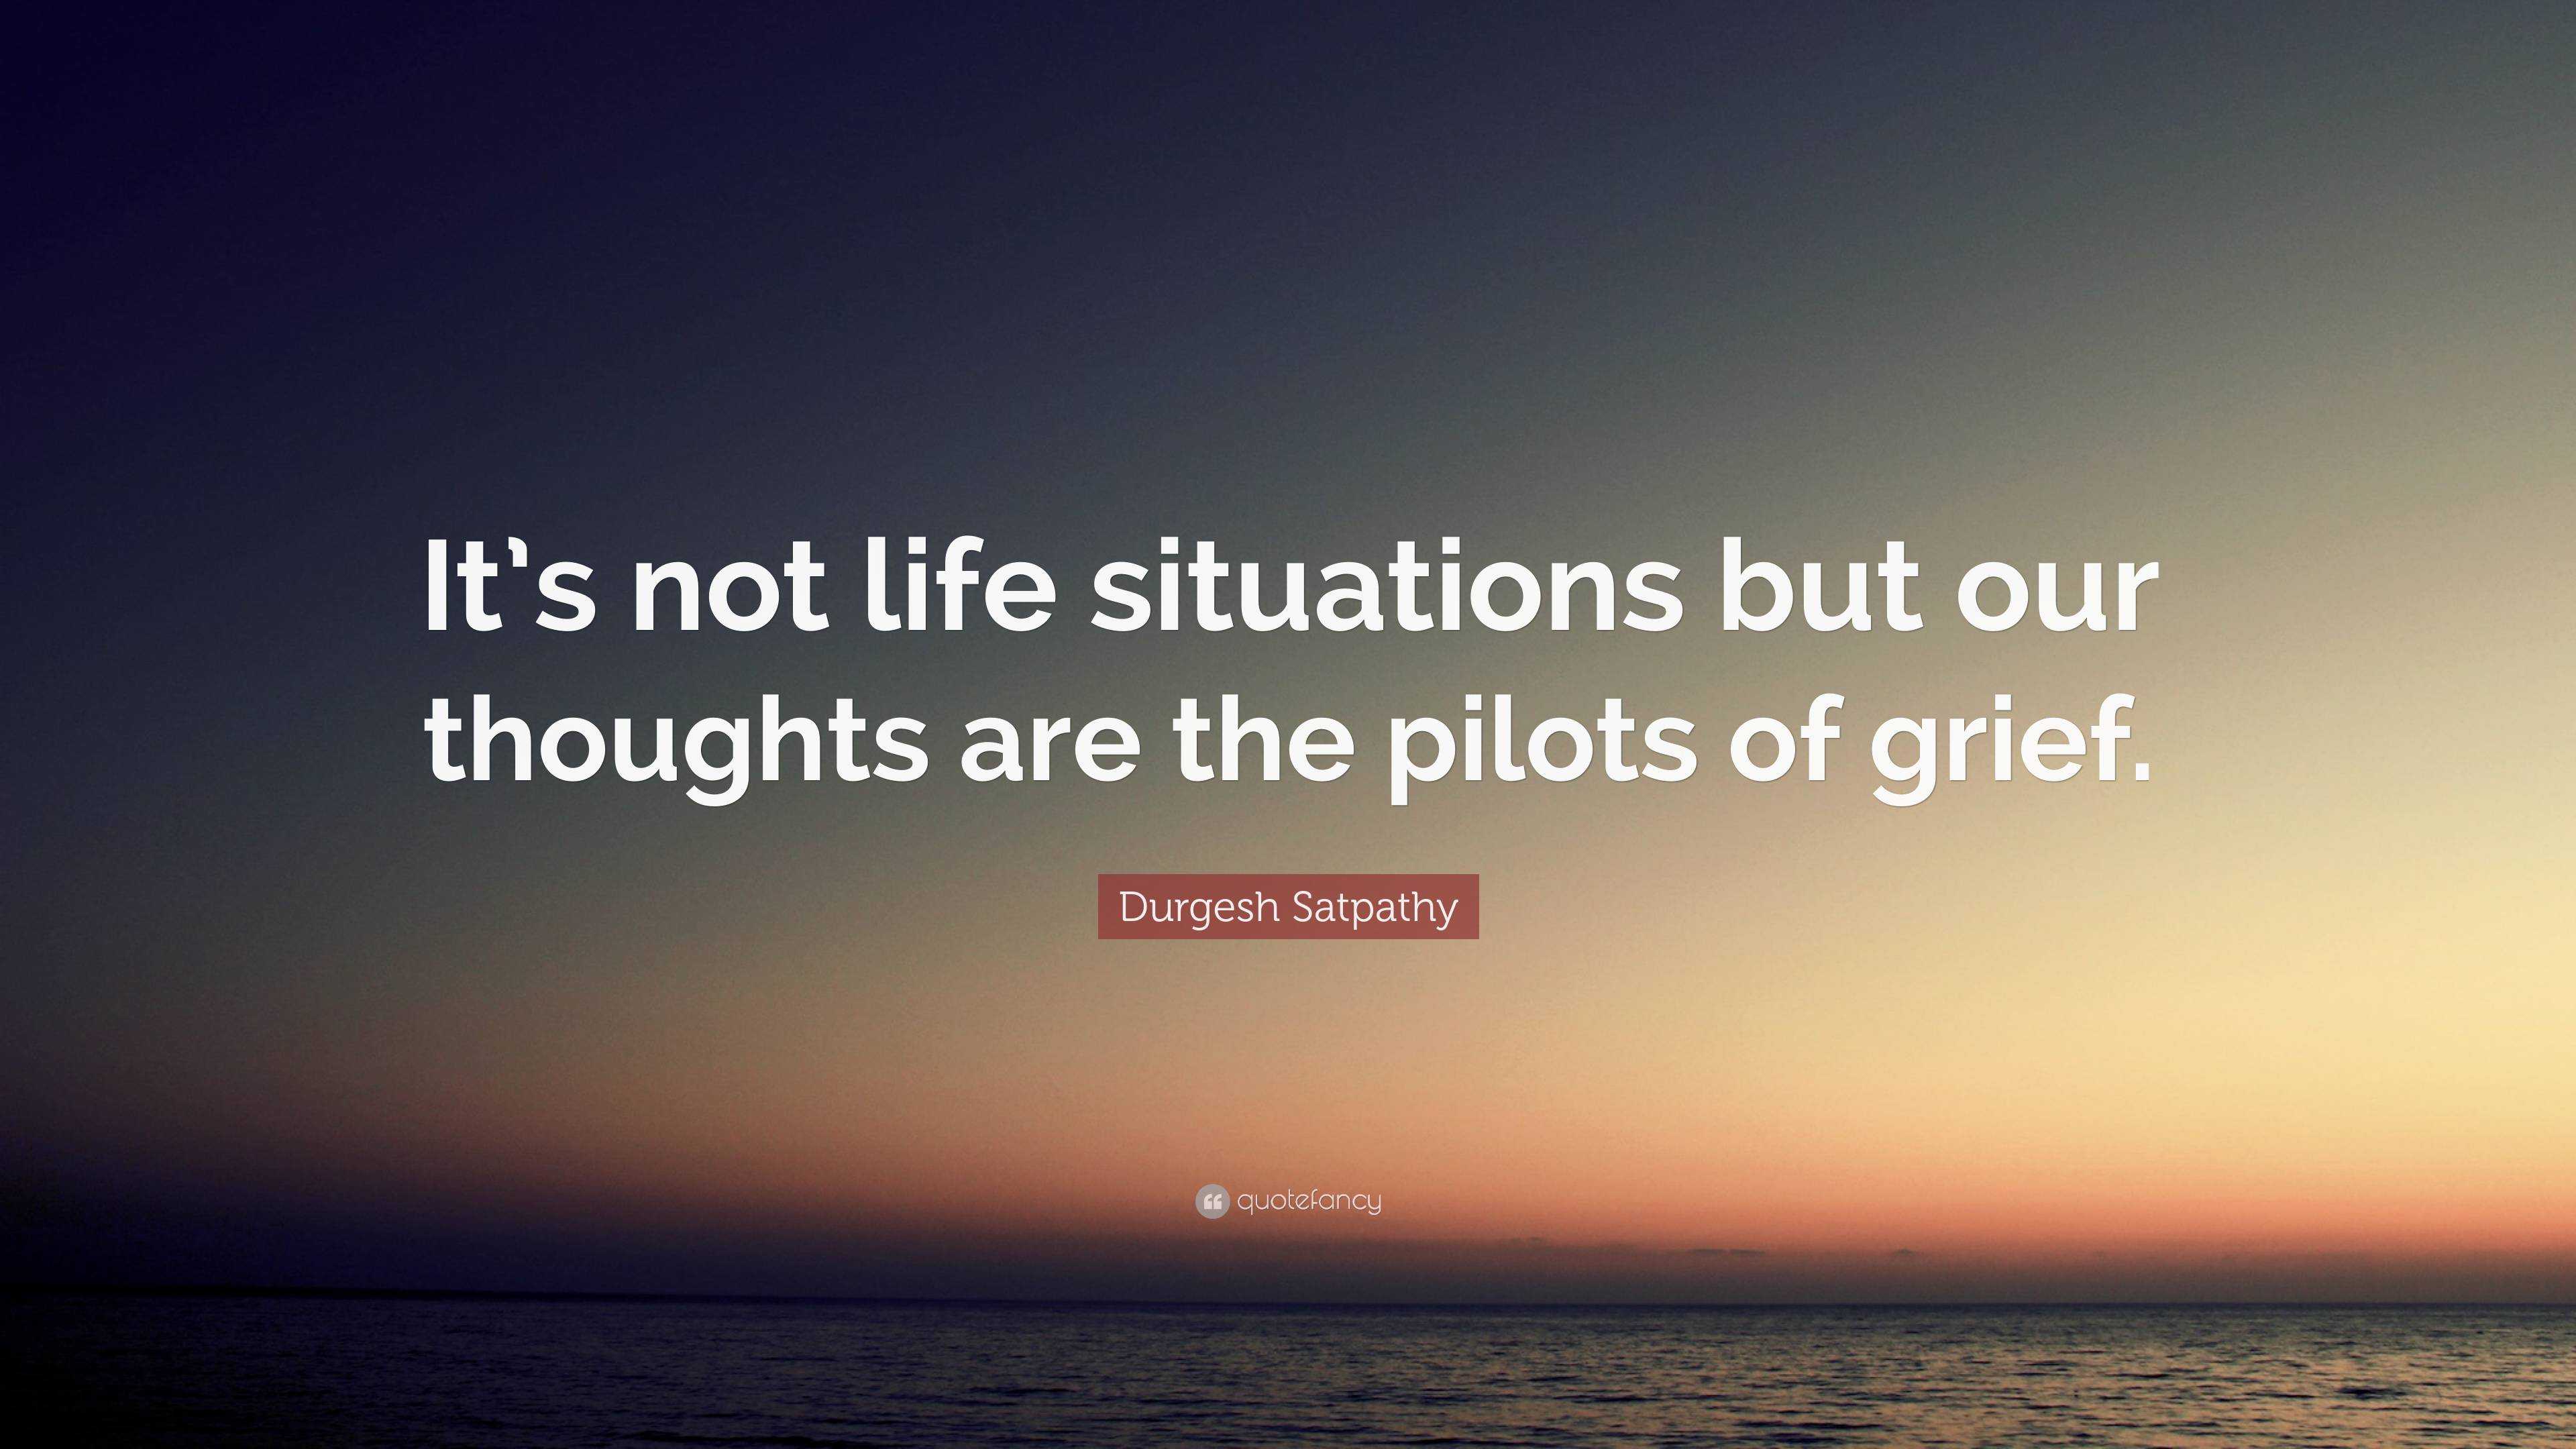 Durgesh Satpathy Quote: “It's not life situations but our thoughts are the  pilots of grief.”